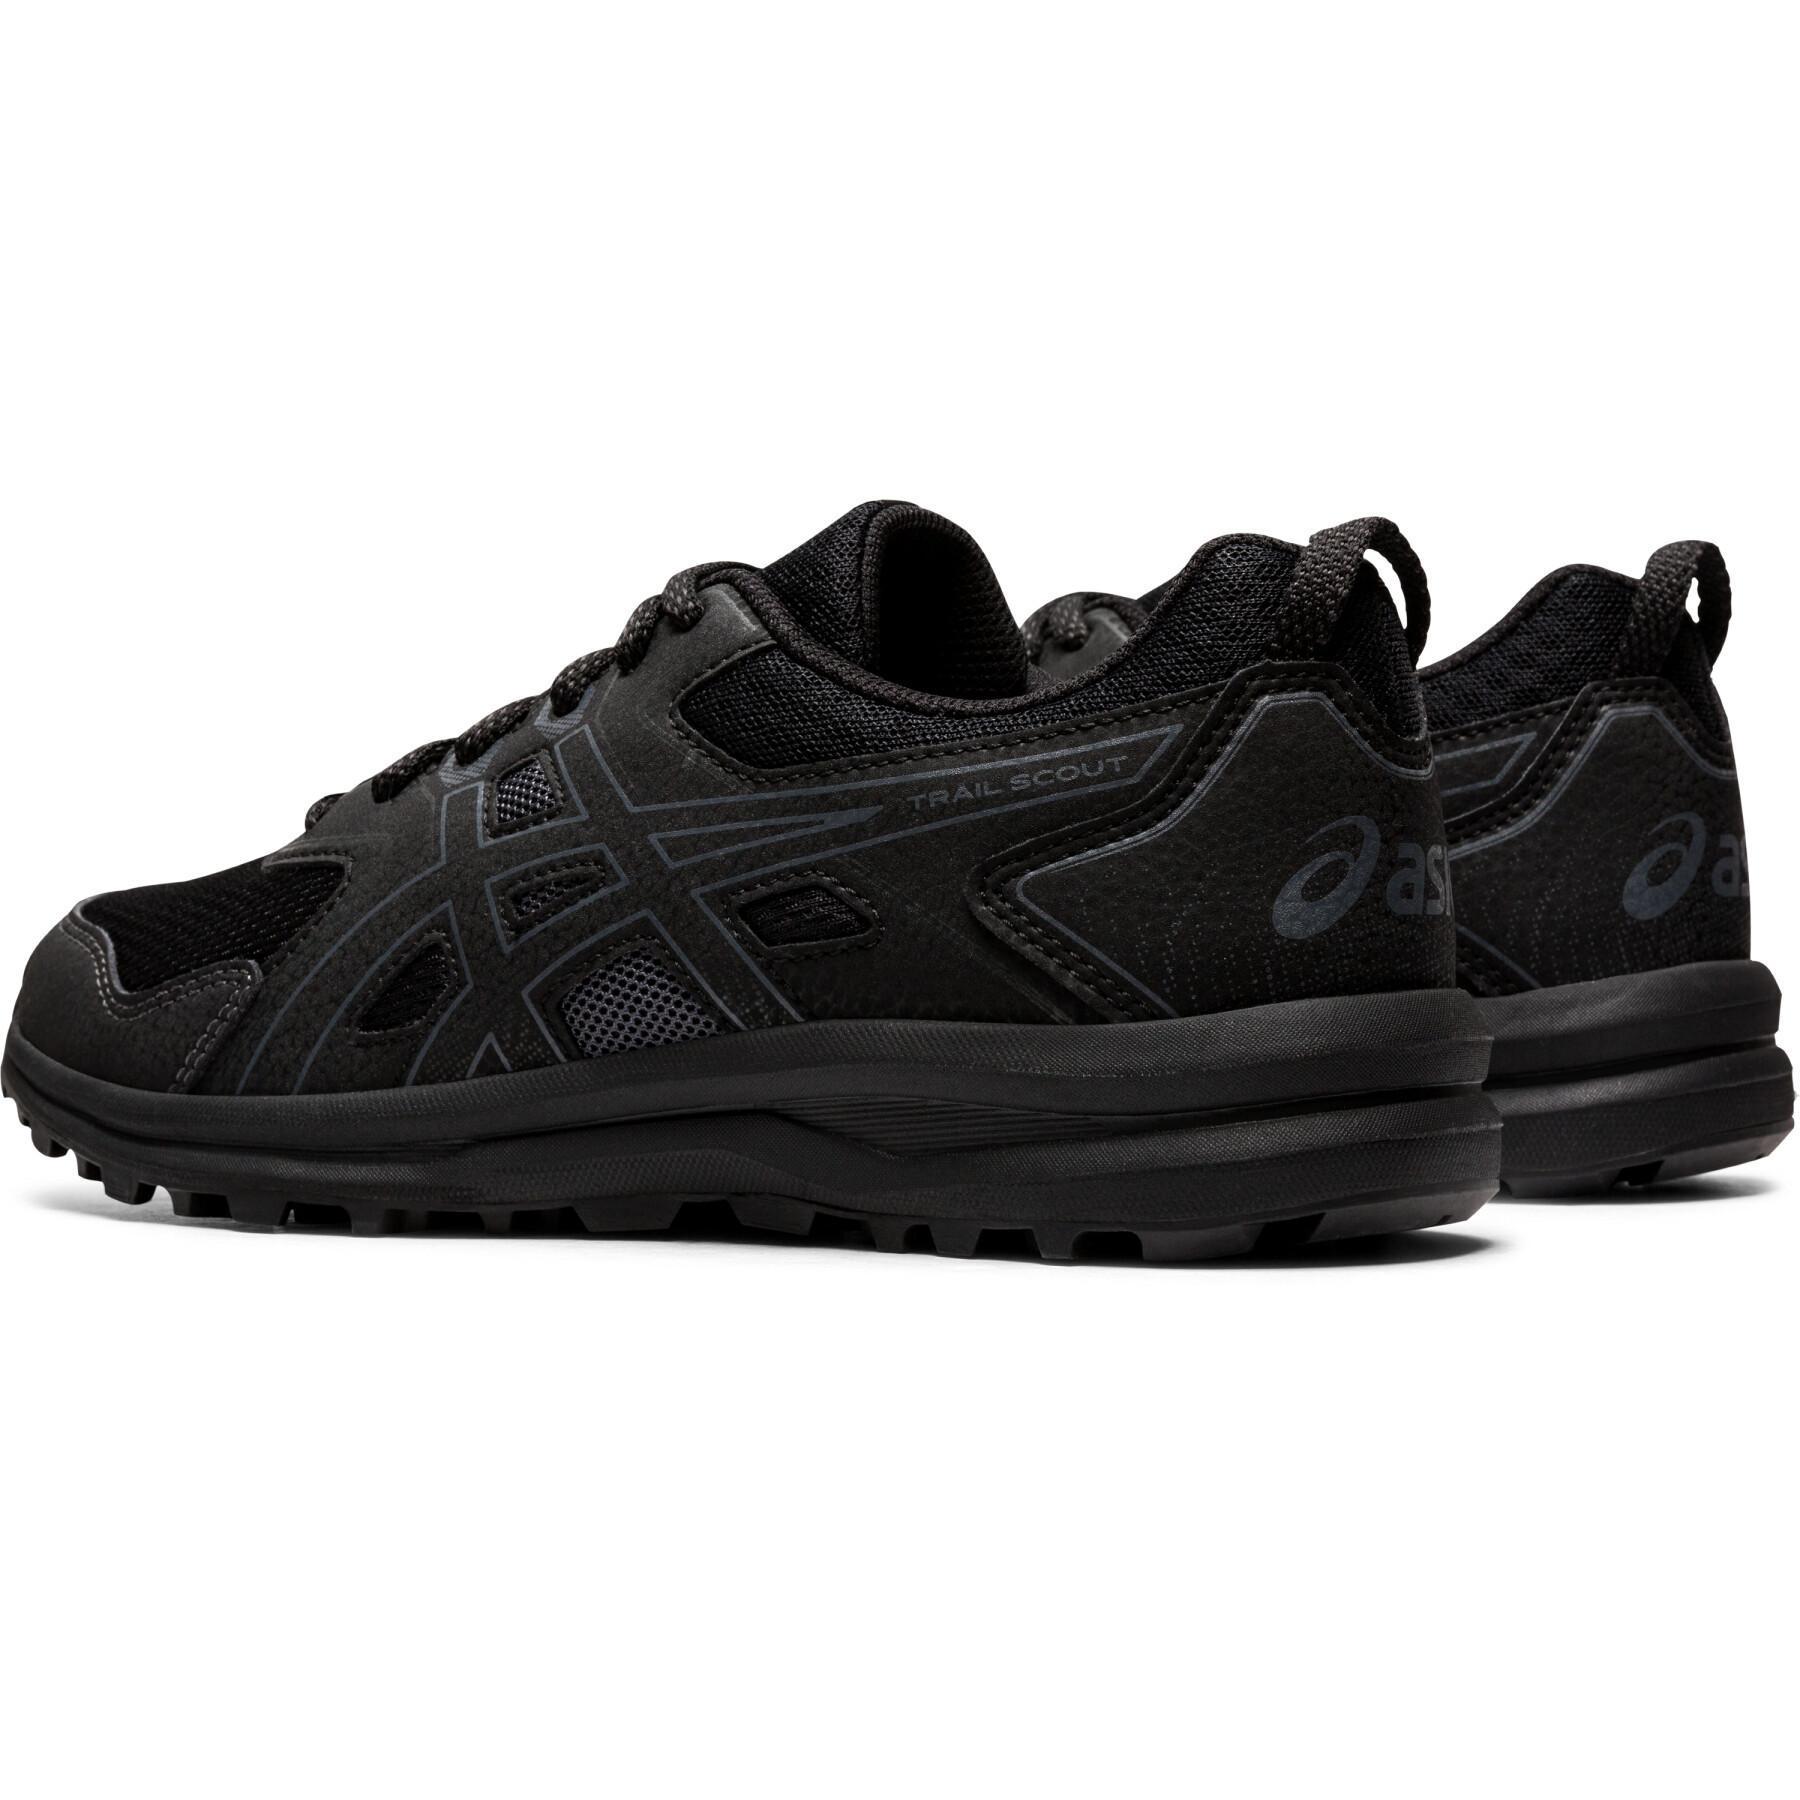 Zapatos de mujer Asics Trailout